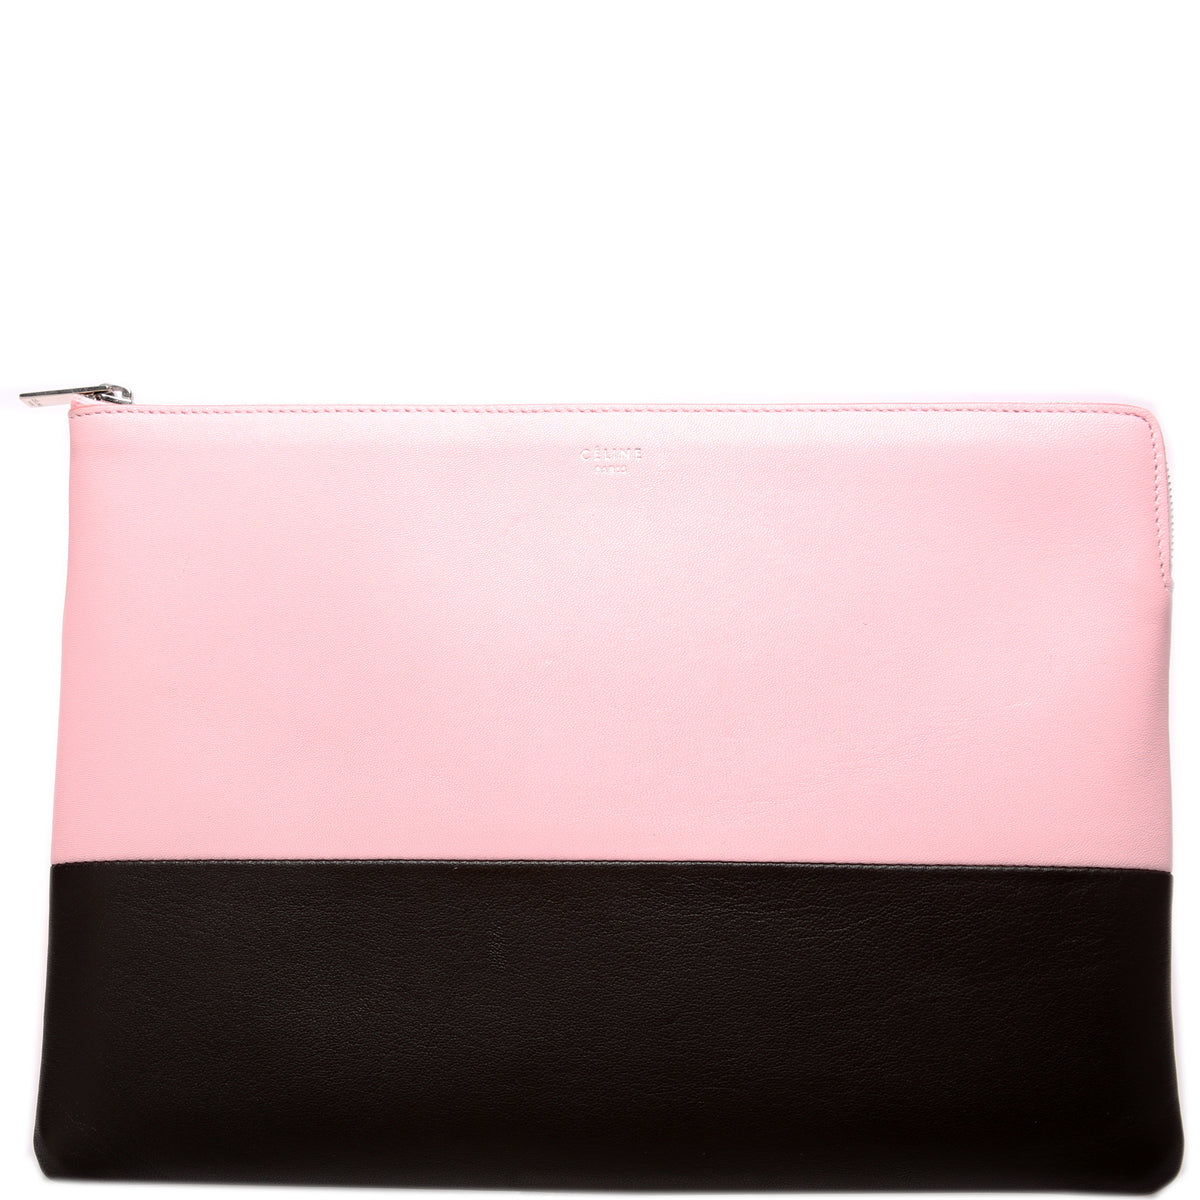 Celine Authenticated Leather Clutch Bag